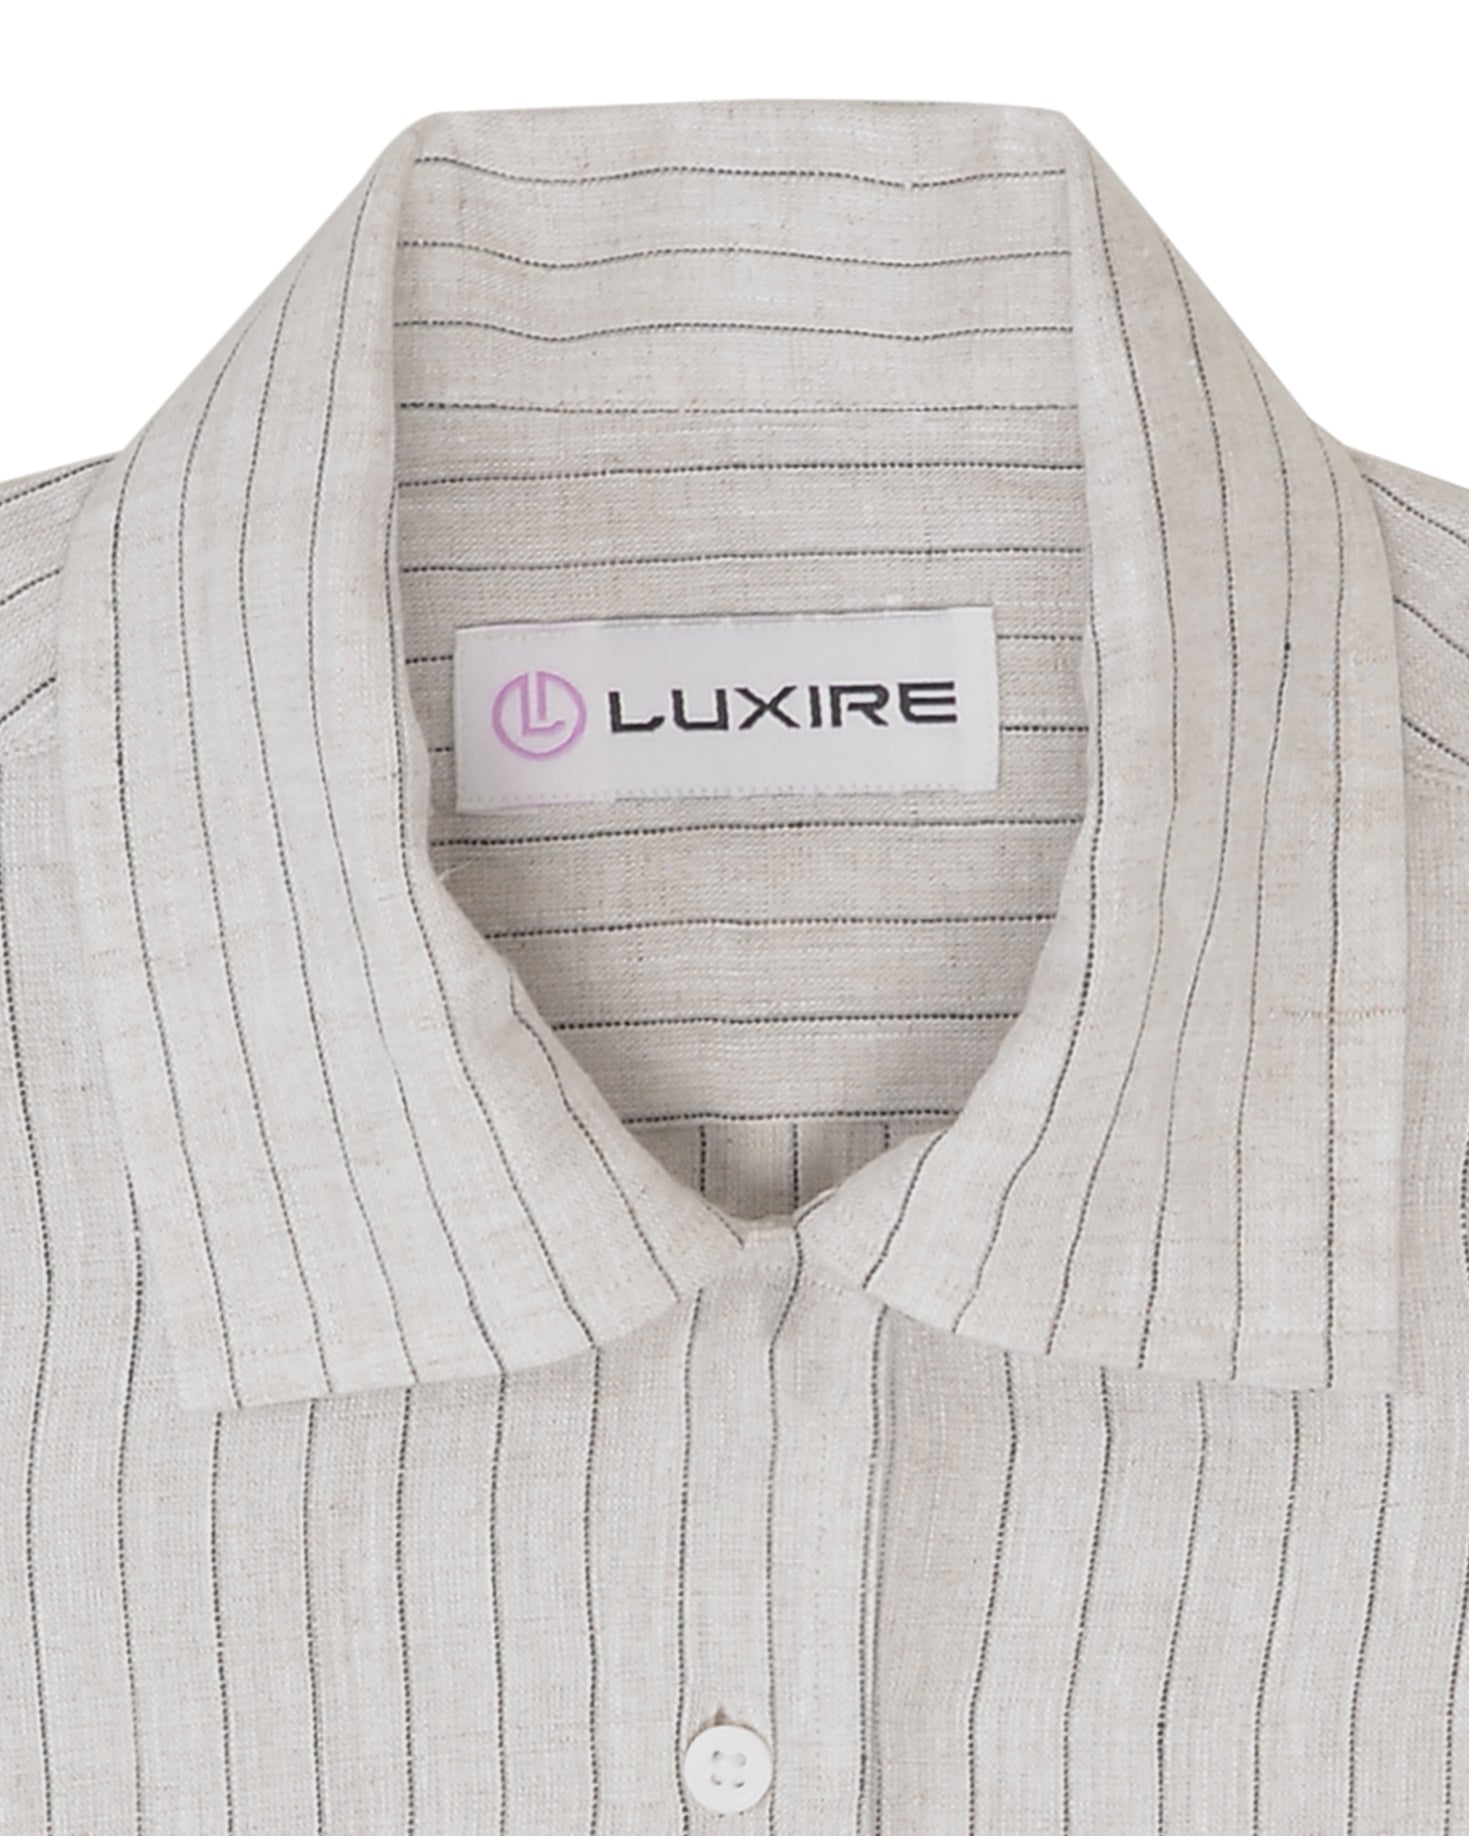 Collar of the custom linen shirt for men in lamb beige with wide stripes by Luxire Clothing